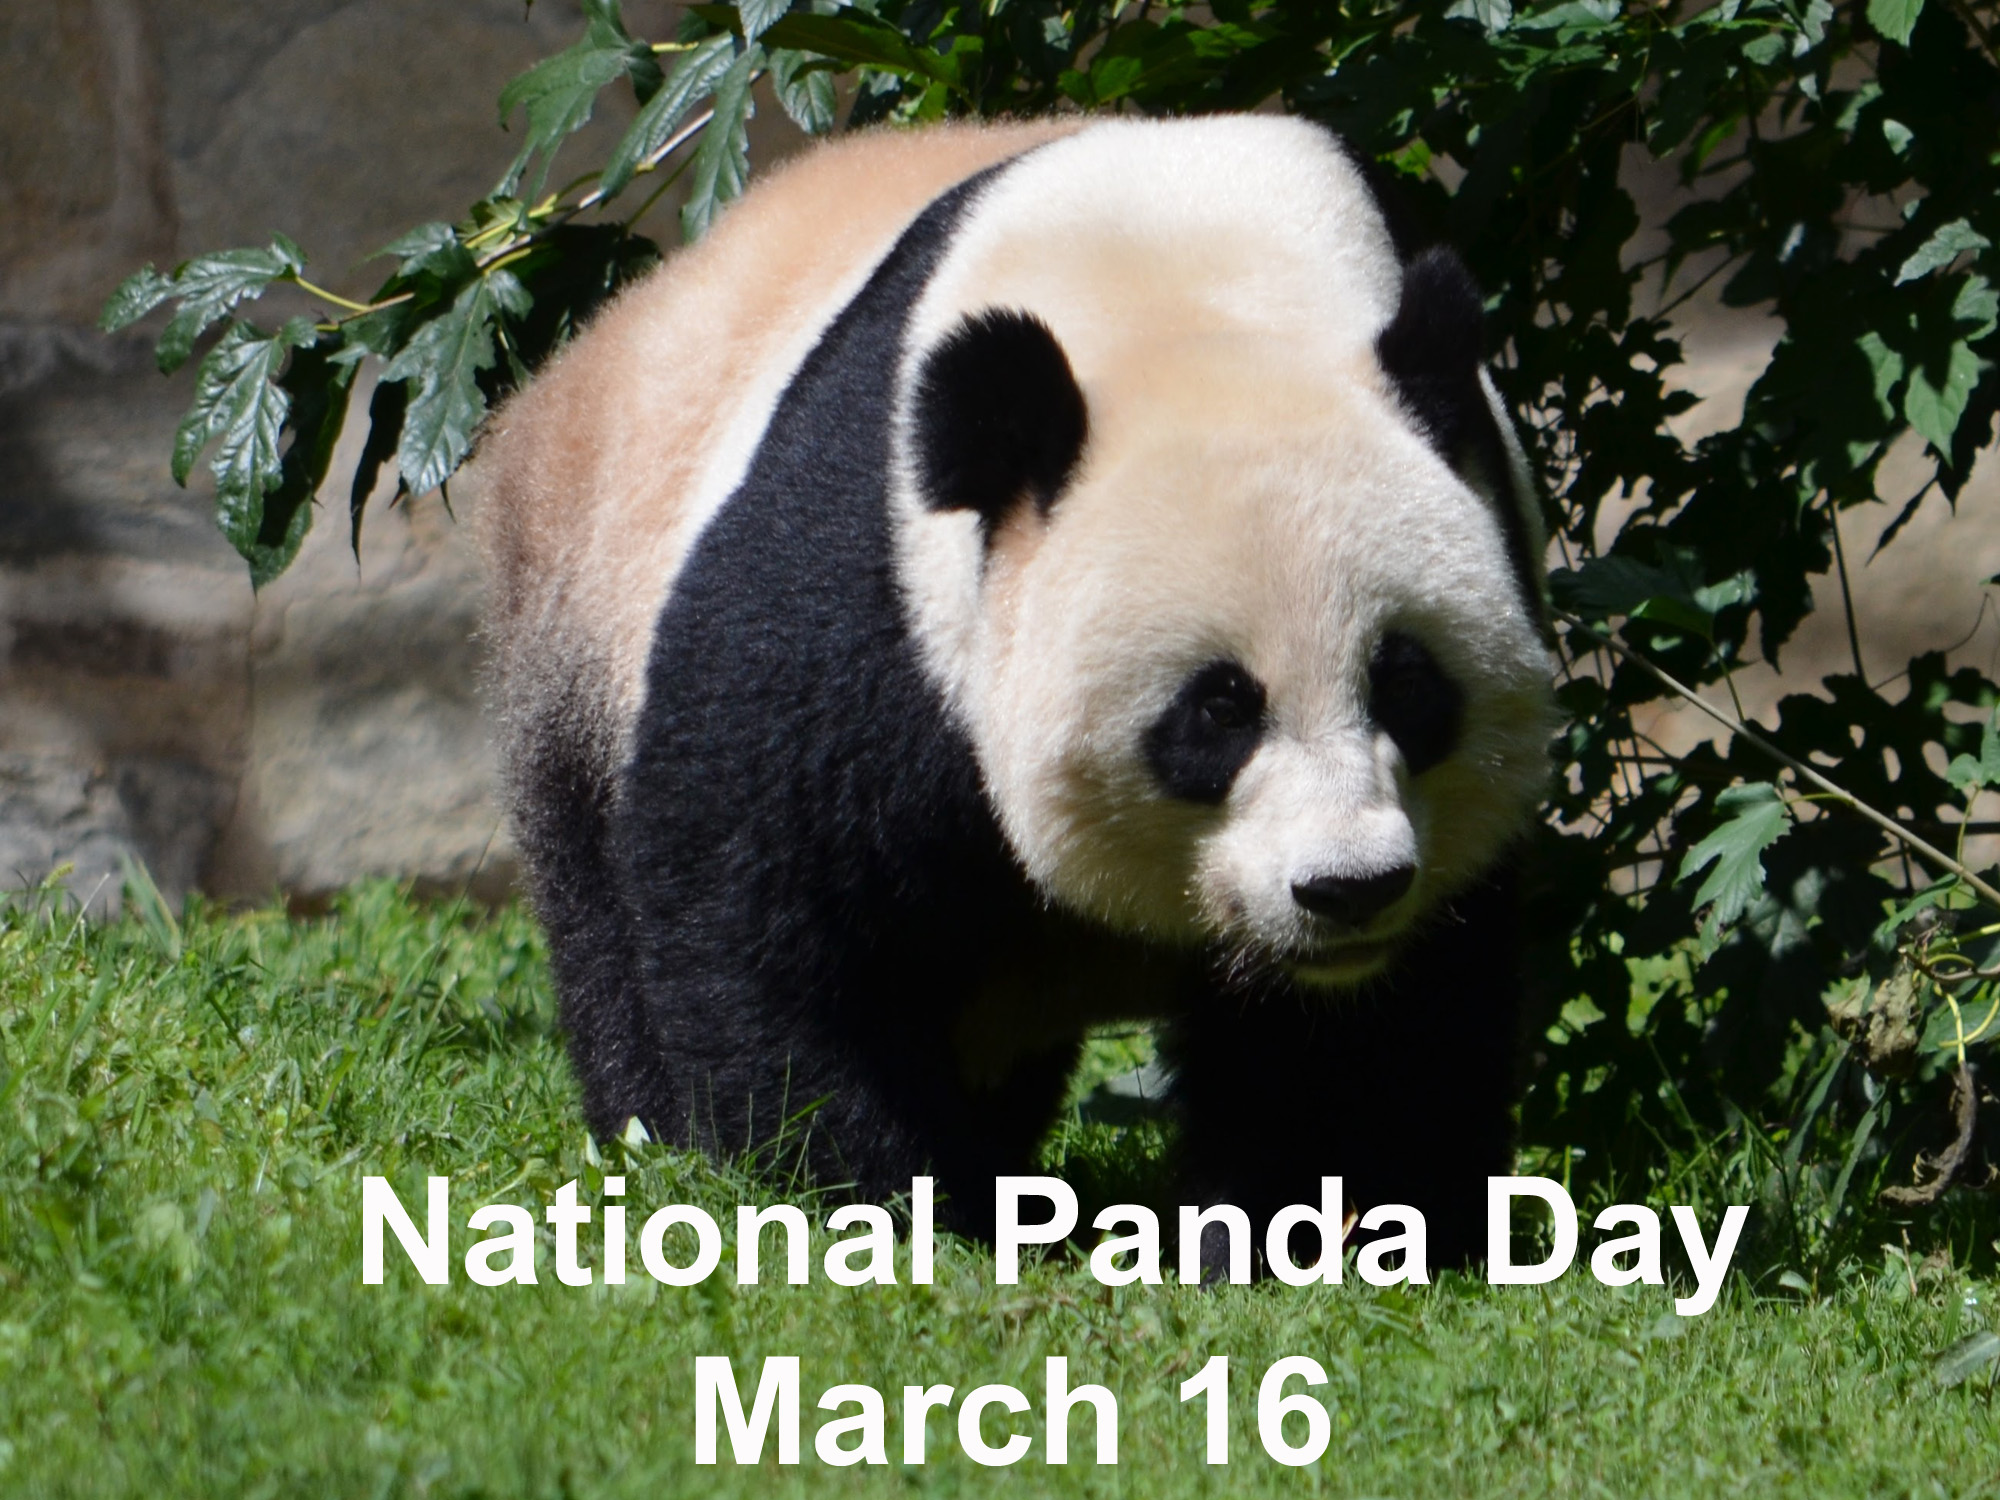 Fun facts for National Panda Day